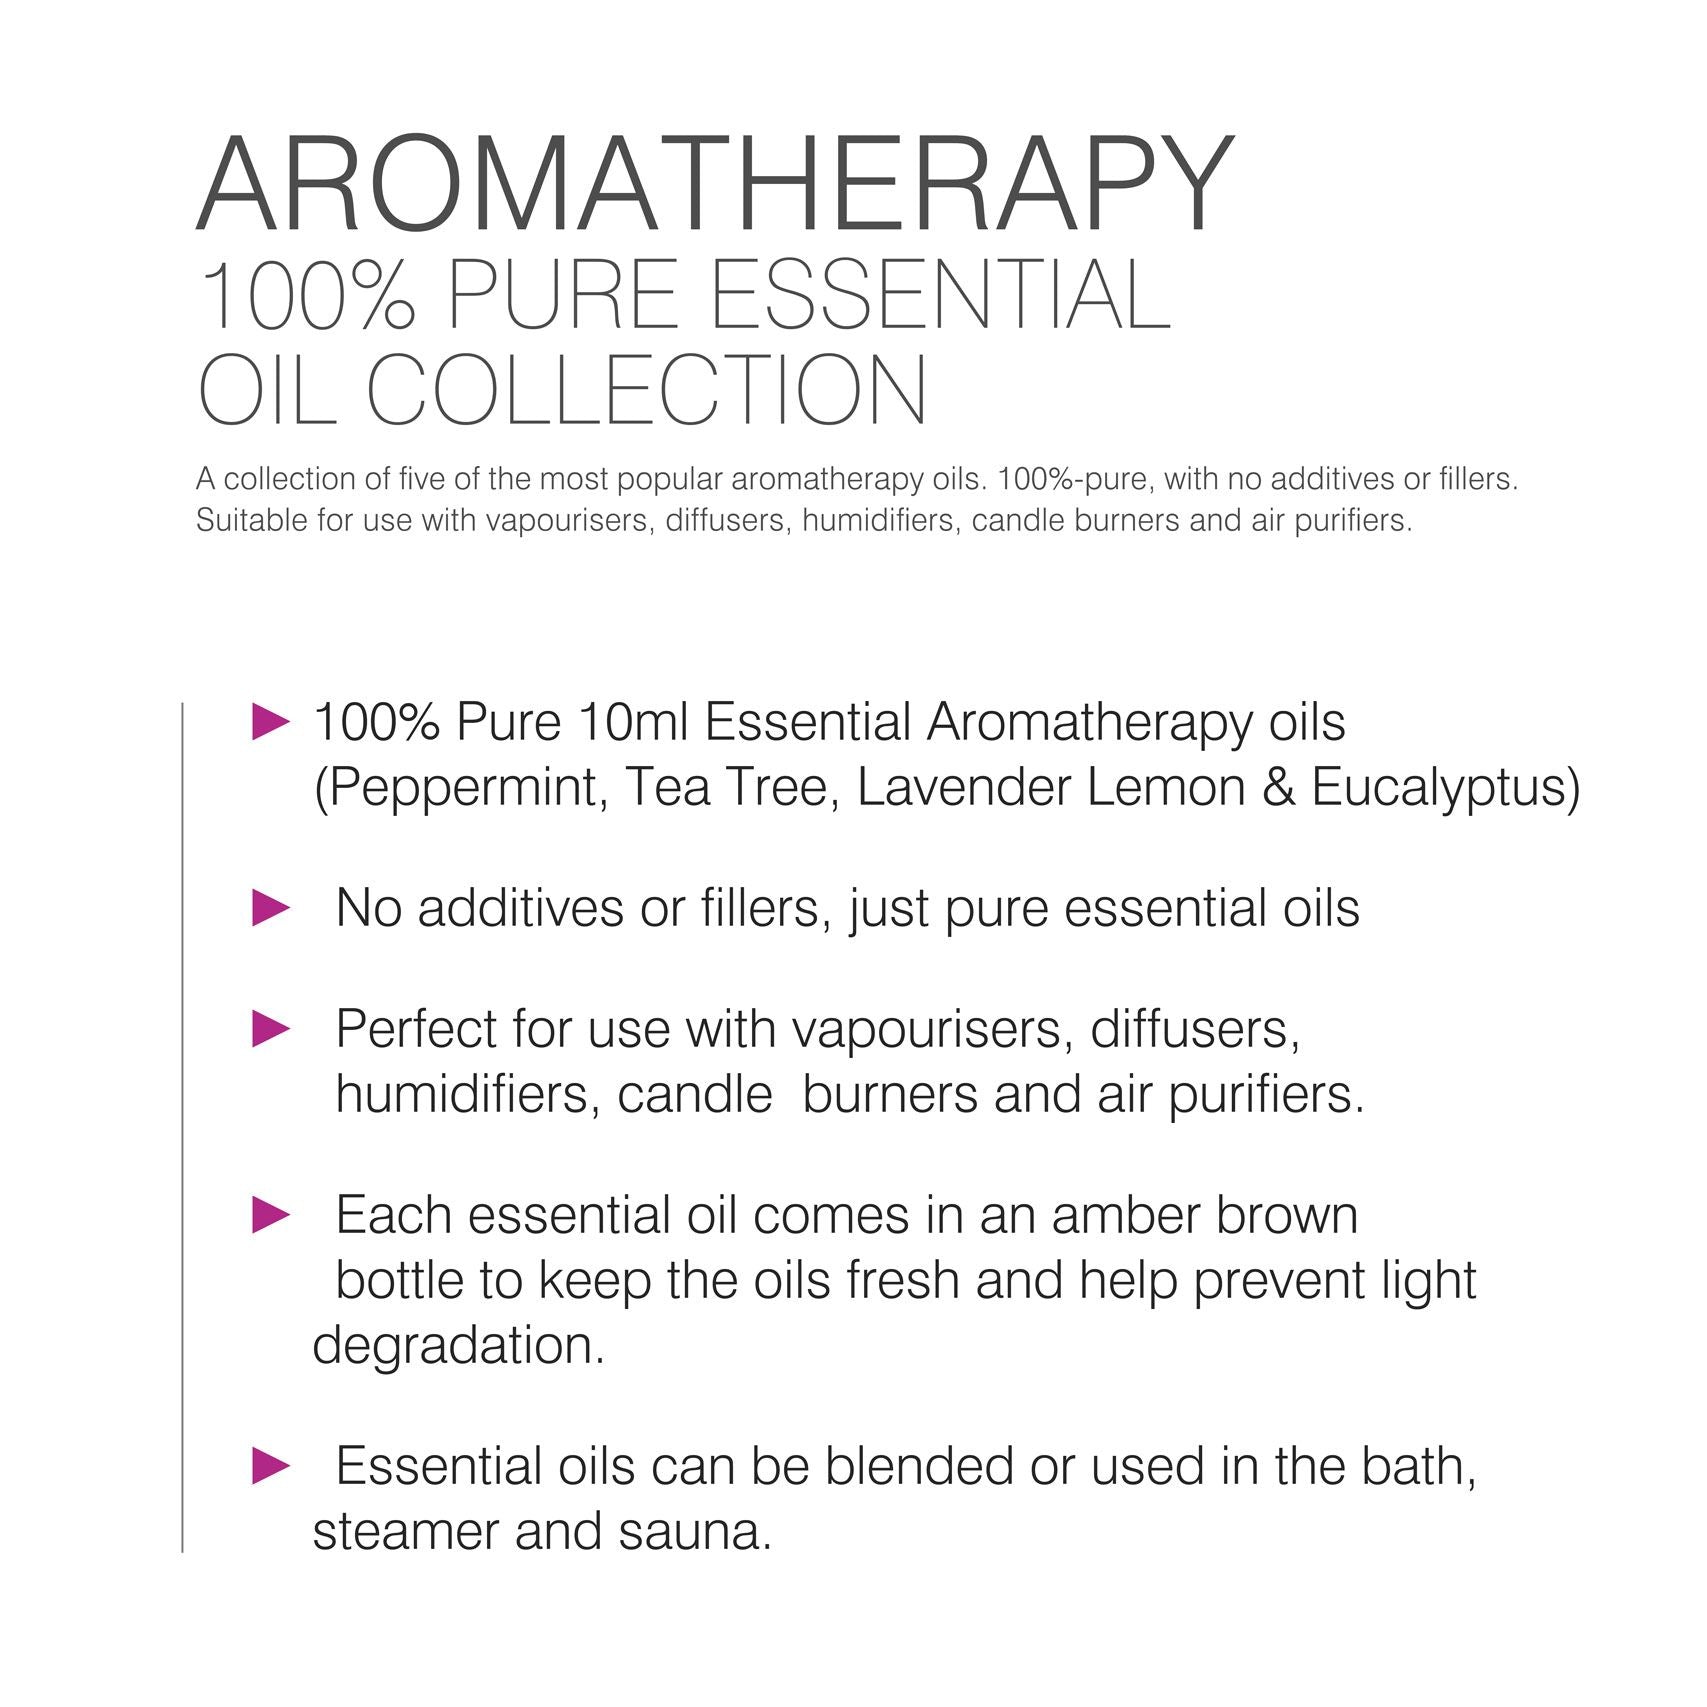 bulleted text listing features of rio aromatherapy 100% essential oil collection 100% pure 10ml essential aromatherapy oil no additives or fillers just pure essential oil perfect for use with vaporisers diffusers humidifiers candle burners and air purifiers each essential oil comes in an amber brown bottle to keep the oils fresh and help prevent light degradation essential oils can be blended or used in the bath steamer and sauna 